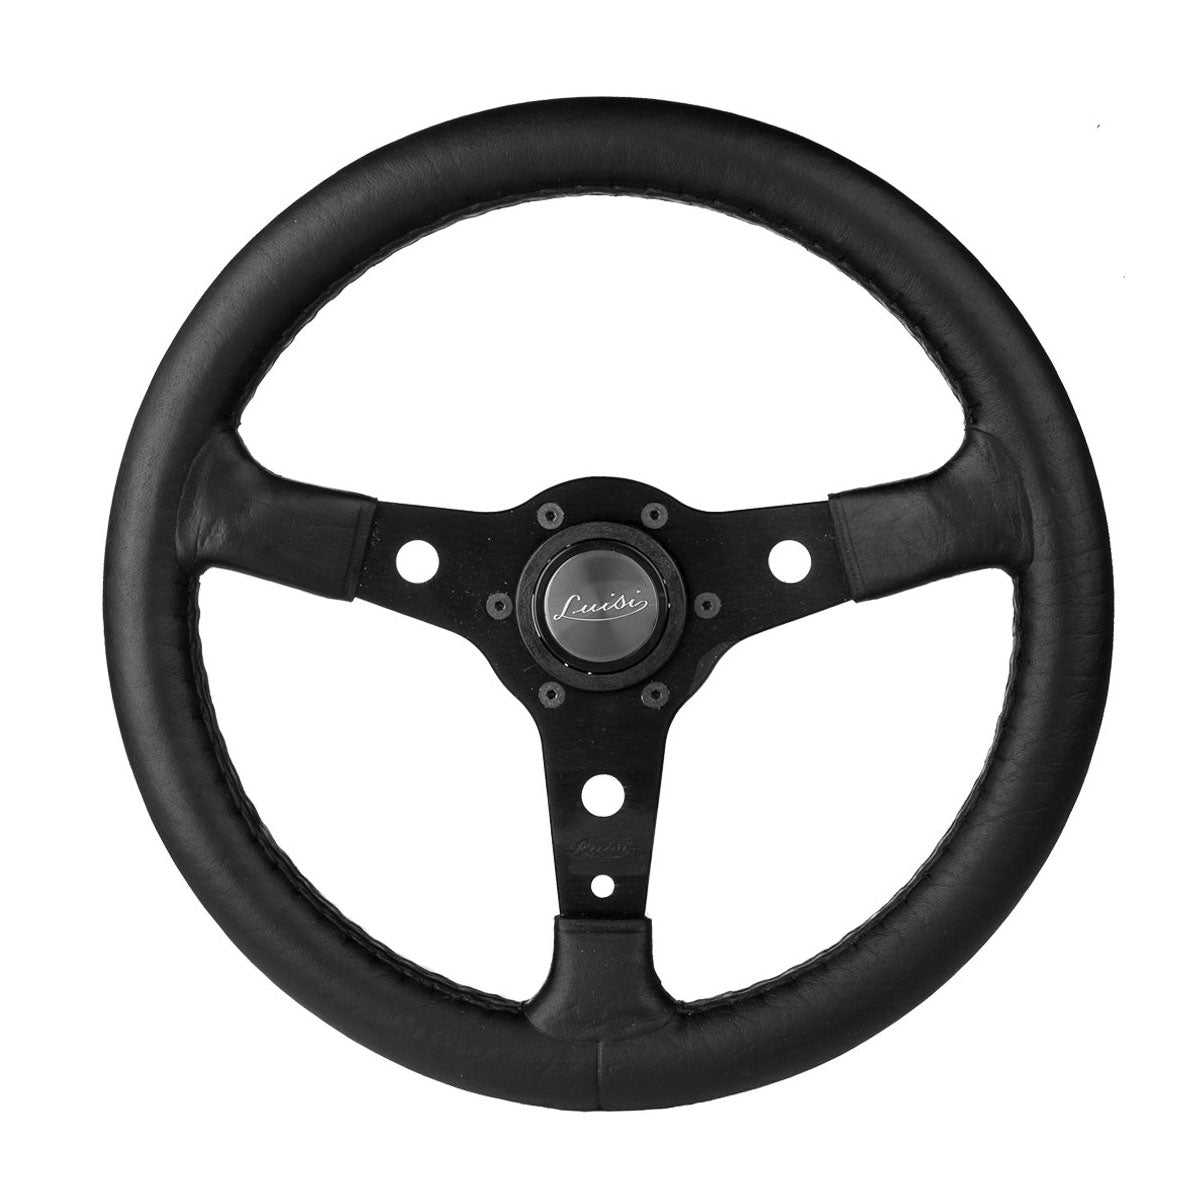 LUISI Versilia sports steering wheel synthetic leather black (dish / with TÜV)